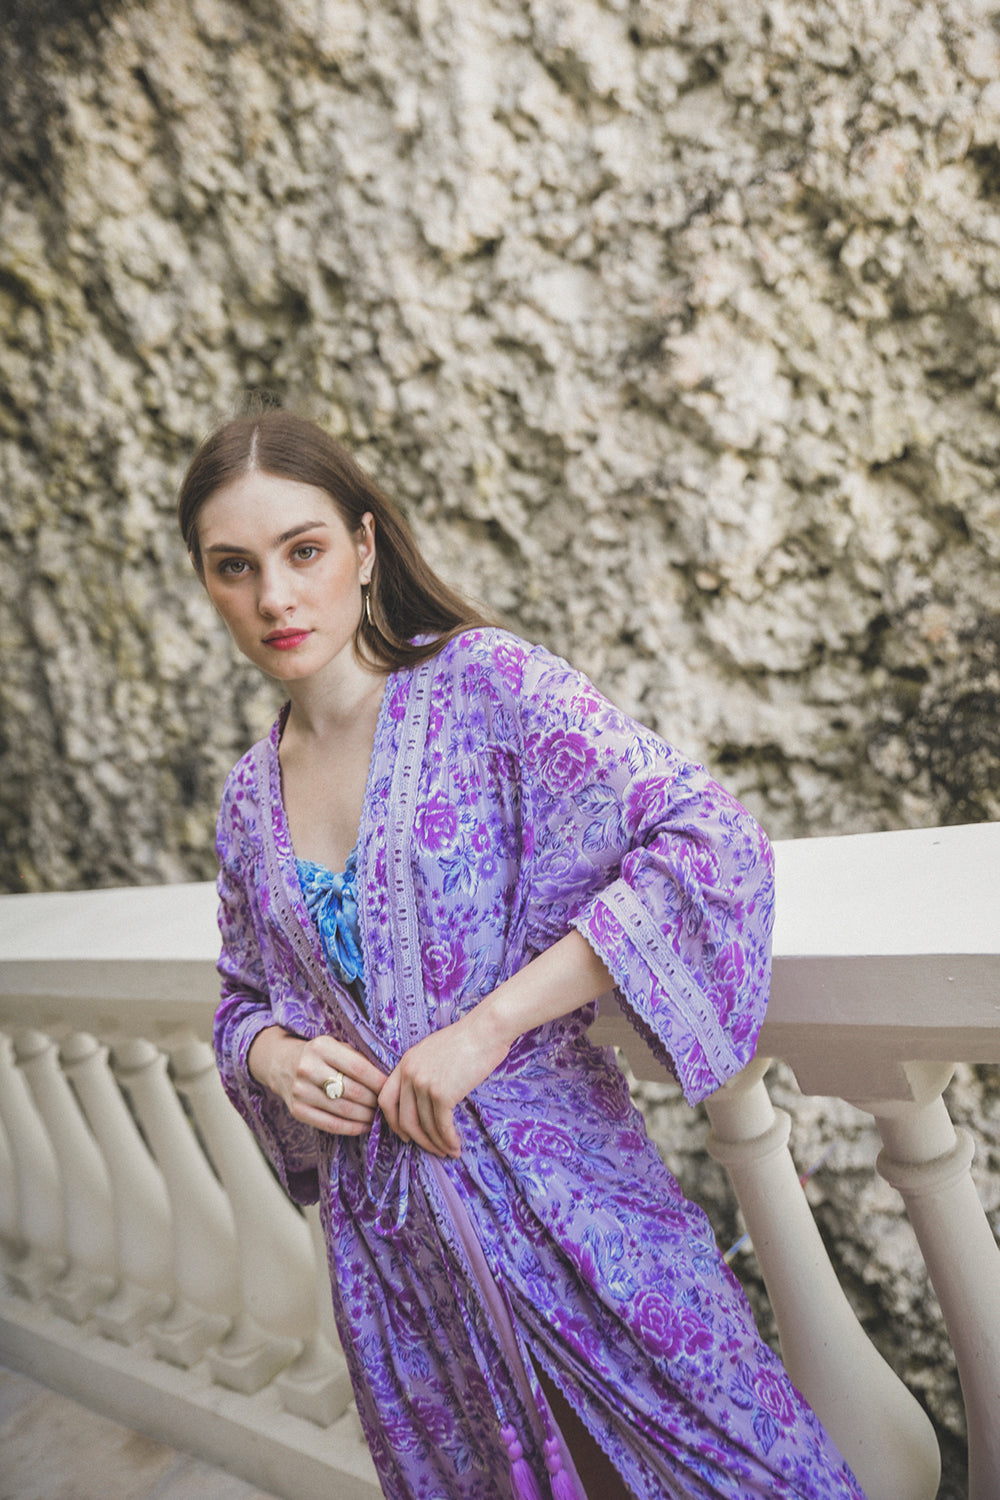 Indulge in comfort and elegance with the Peony Long Robe, a kimono-inspired gem from Tulle and Batiste's Peony collection, ethically crafted by Balinese artisans